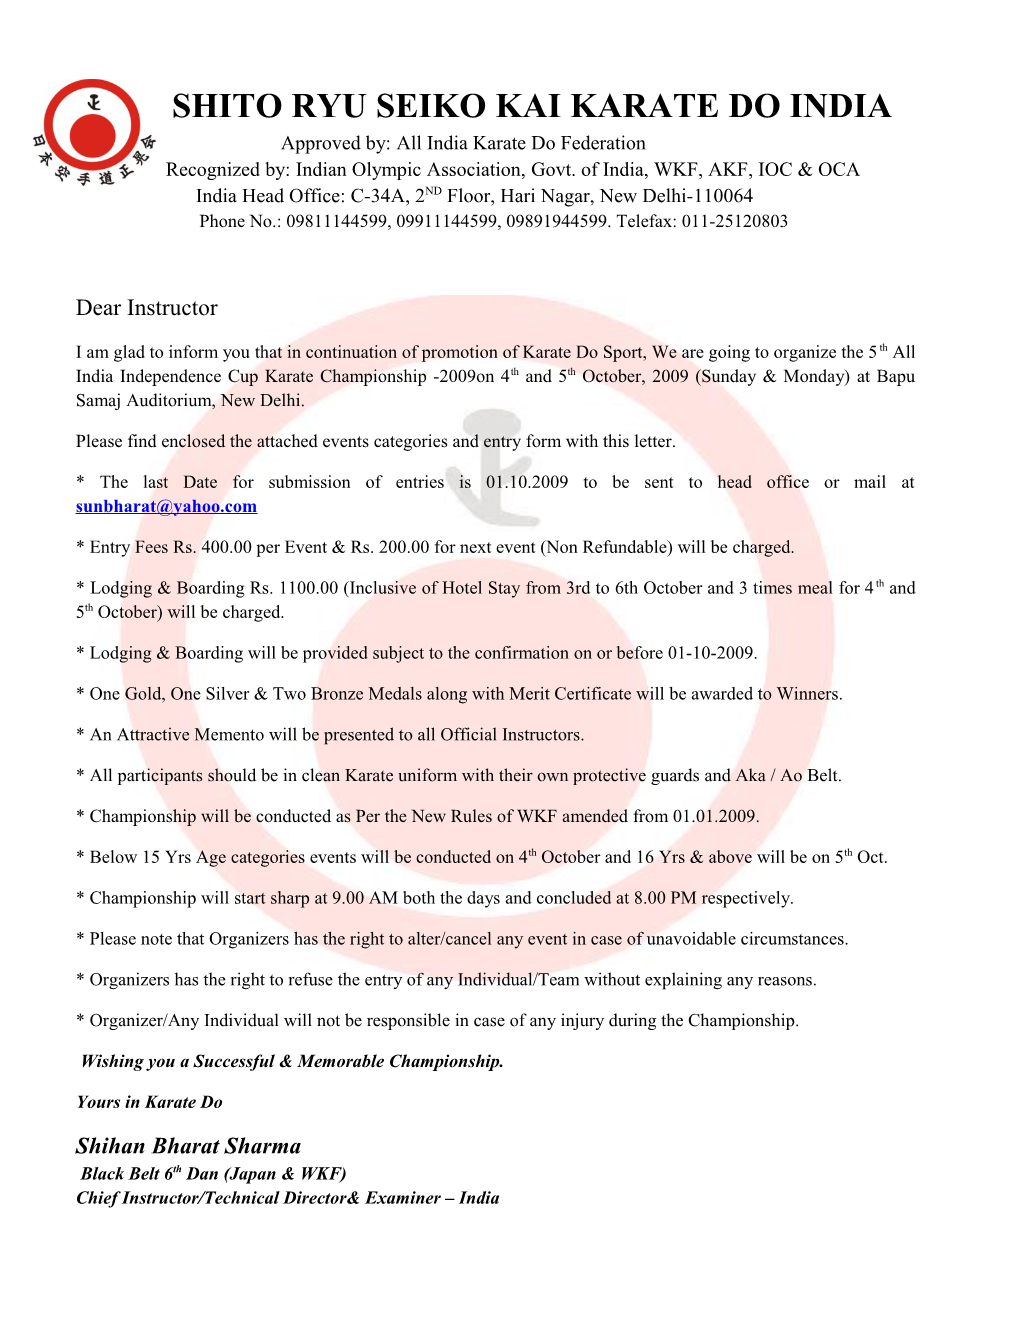 Approved By: All India Karate Do Federation